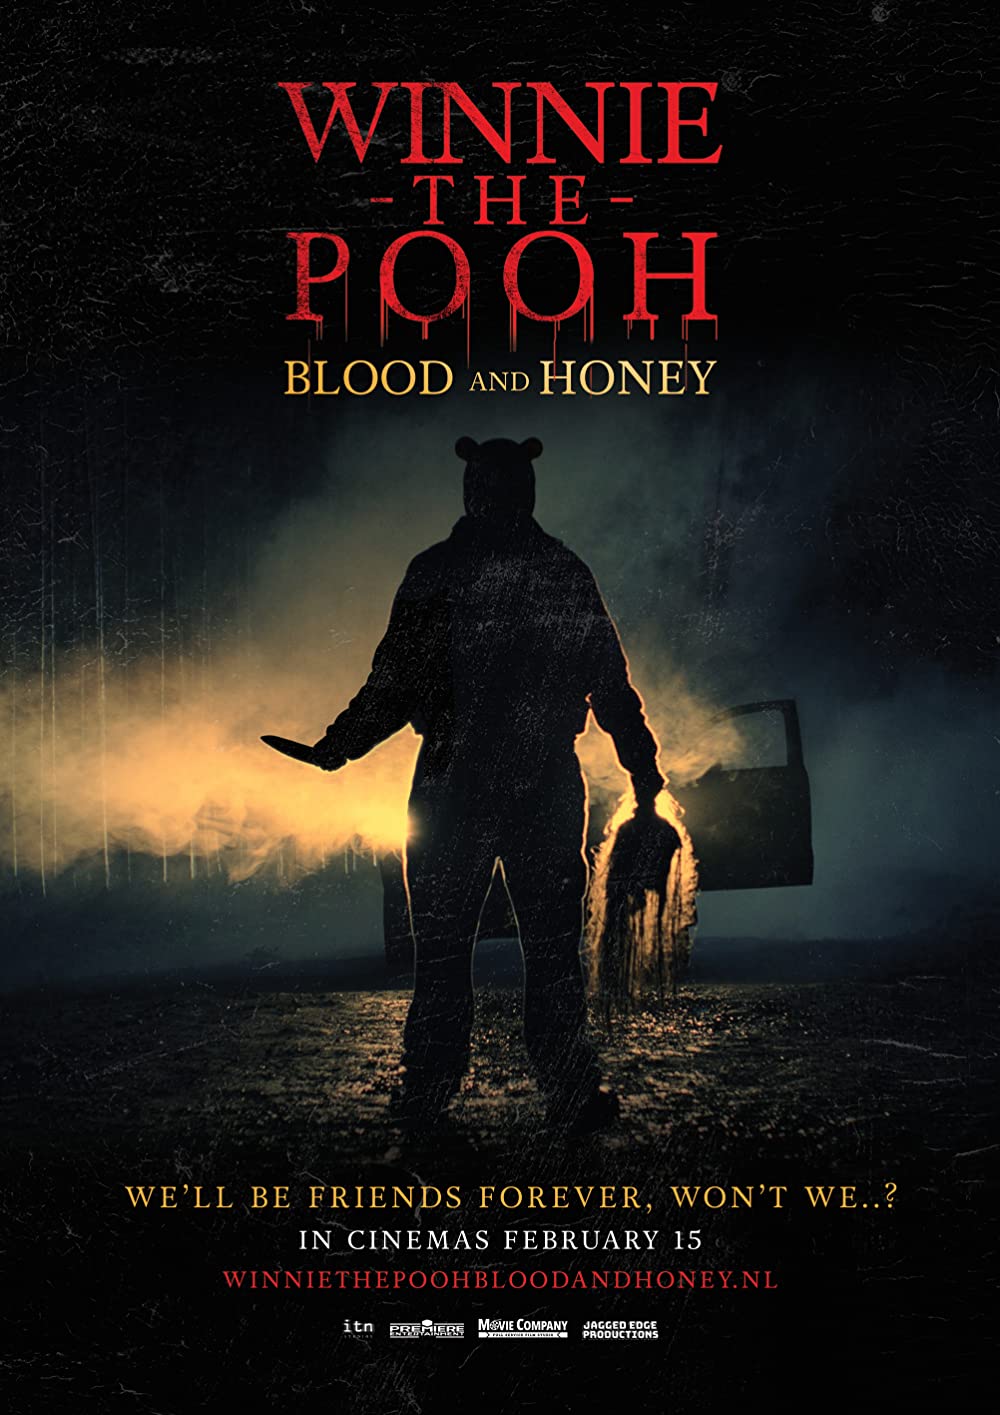 Winnie the Pooh Blood and Honey Poster 1